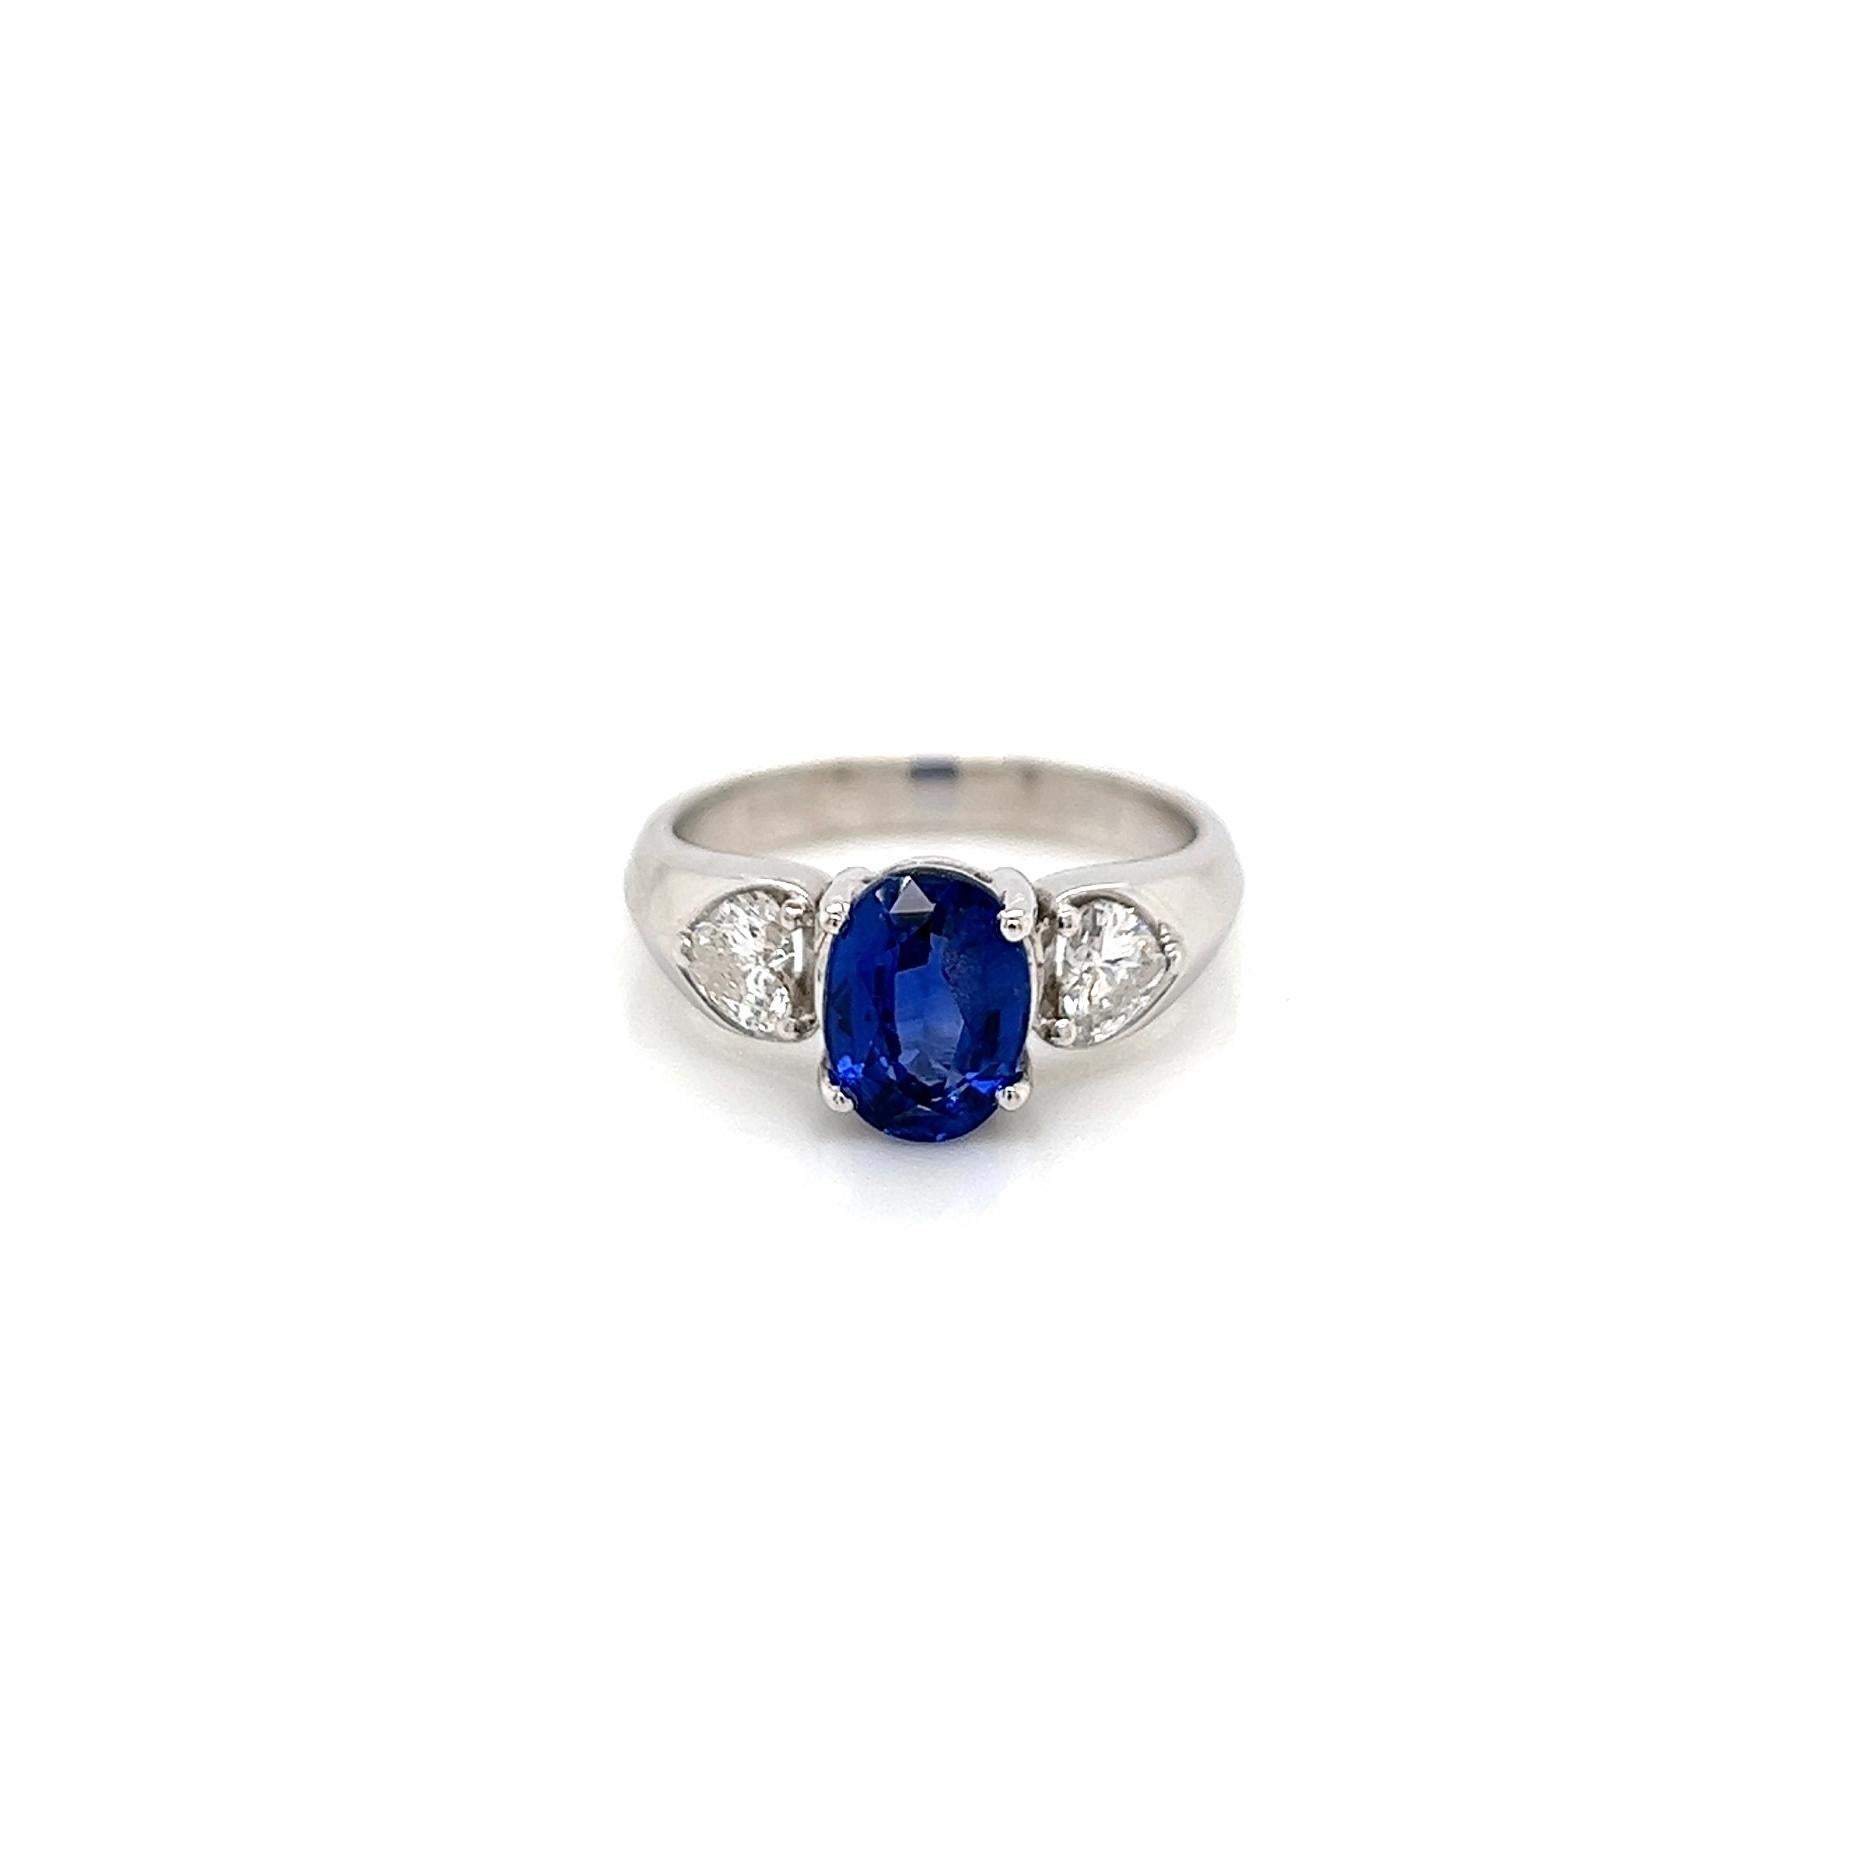 3.07 Total Carat Blue Sapphire Diamond Engagement Ring

Looking for a fabulous sapphire diamond ring? This ring is for you. Sapphire diamond ring is known for it's symbolic meaning and is a great option for an upgrade to celebrate the past, the